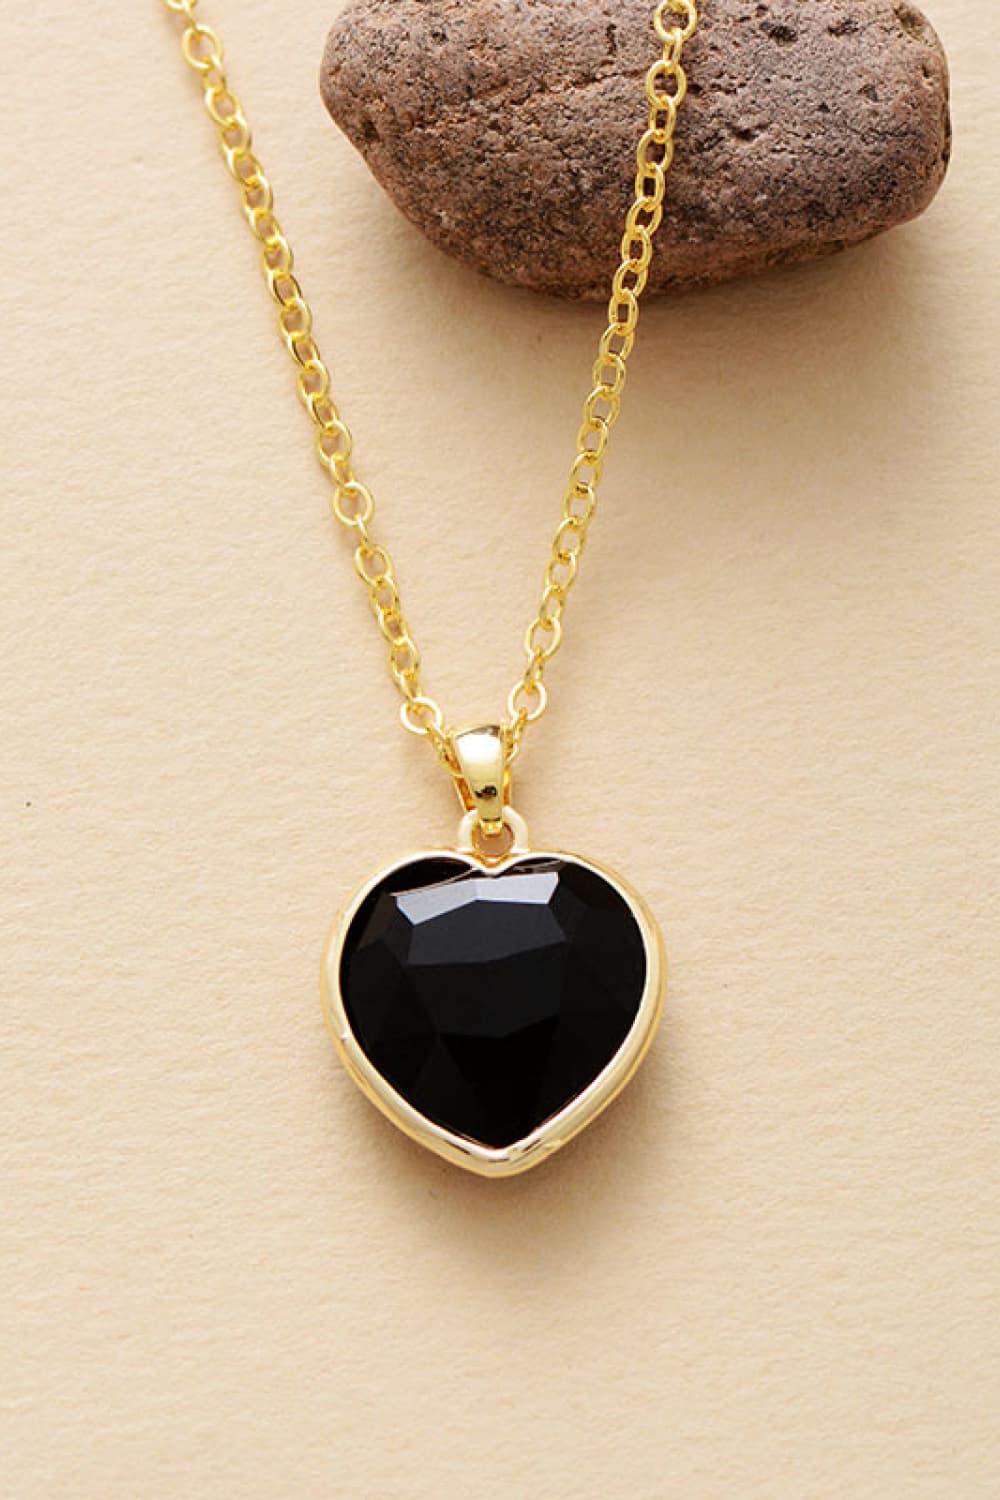 Trendsi Cupid Beauty Supplies Black / One Size Women Necklace Natural Stone Heart Pendant Necklace